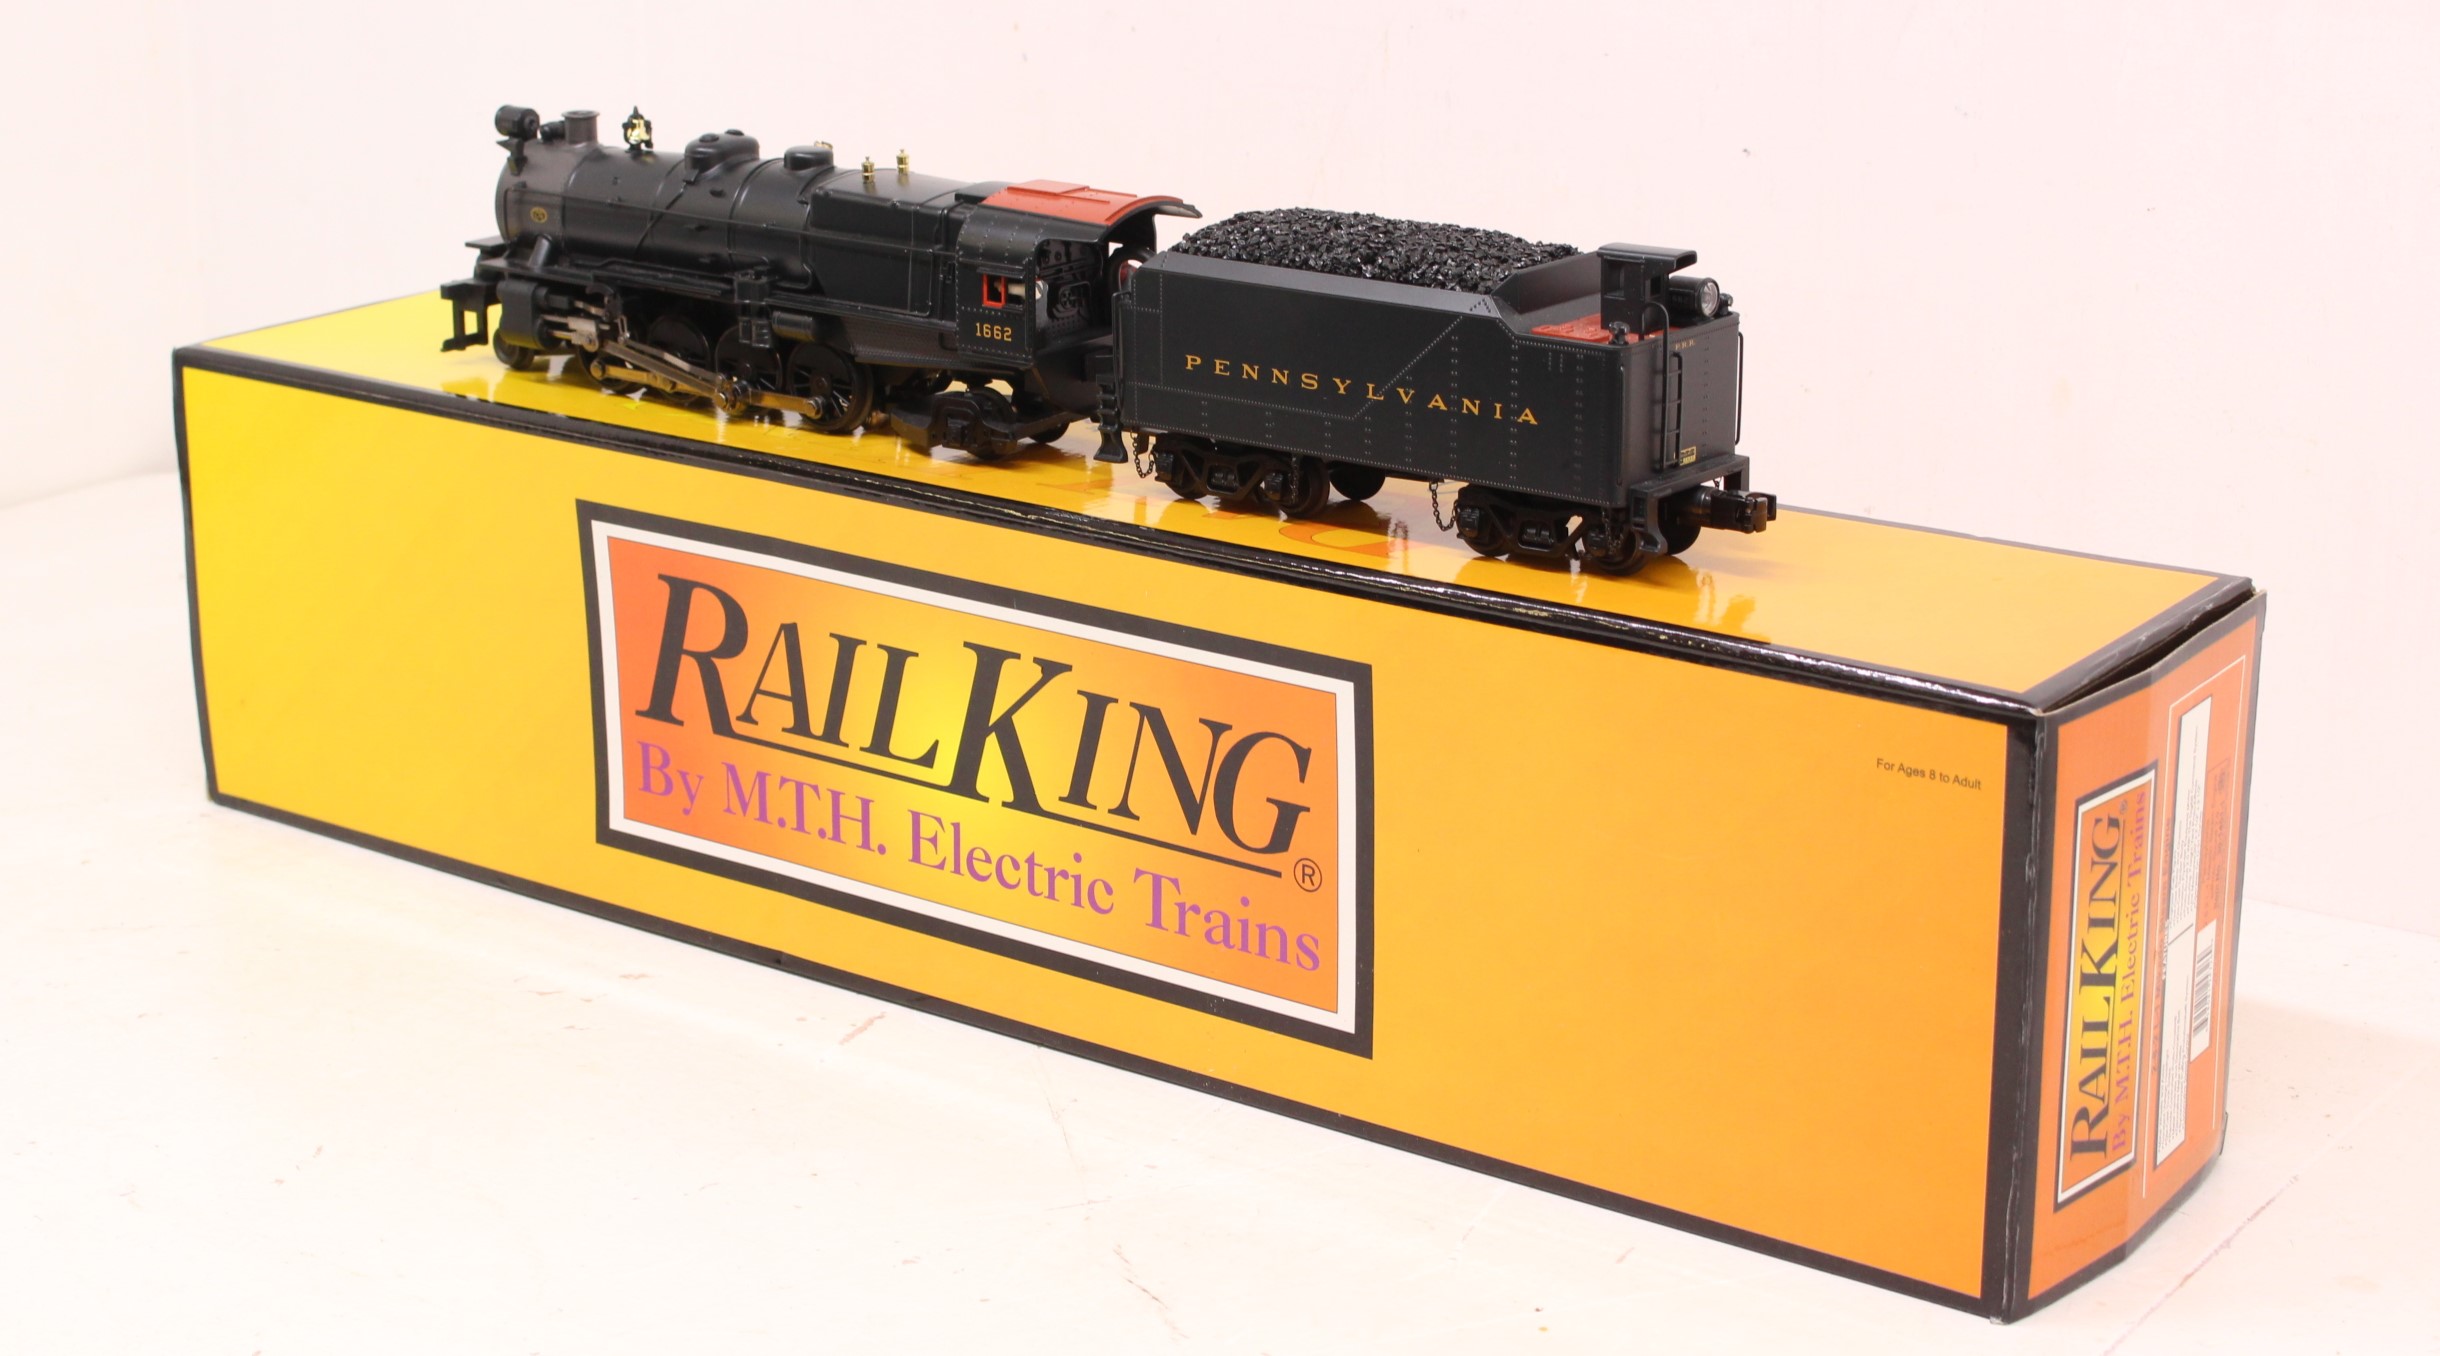 Railking: A boxed Railking by M.T.H. Electric Trains, Pennsylvania 2-8-2 L-1 Mikado Steam Engine - Image 3 of 3